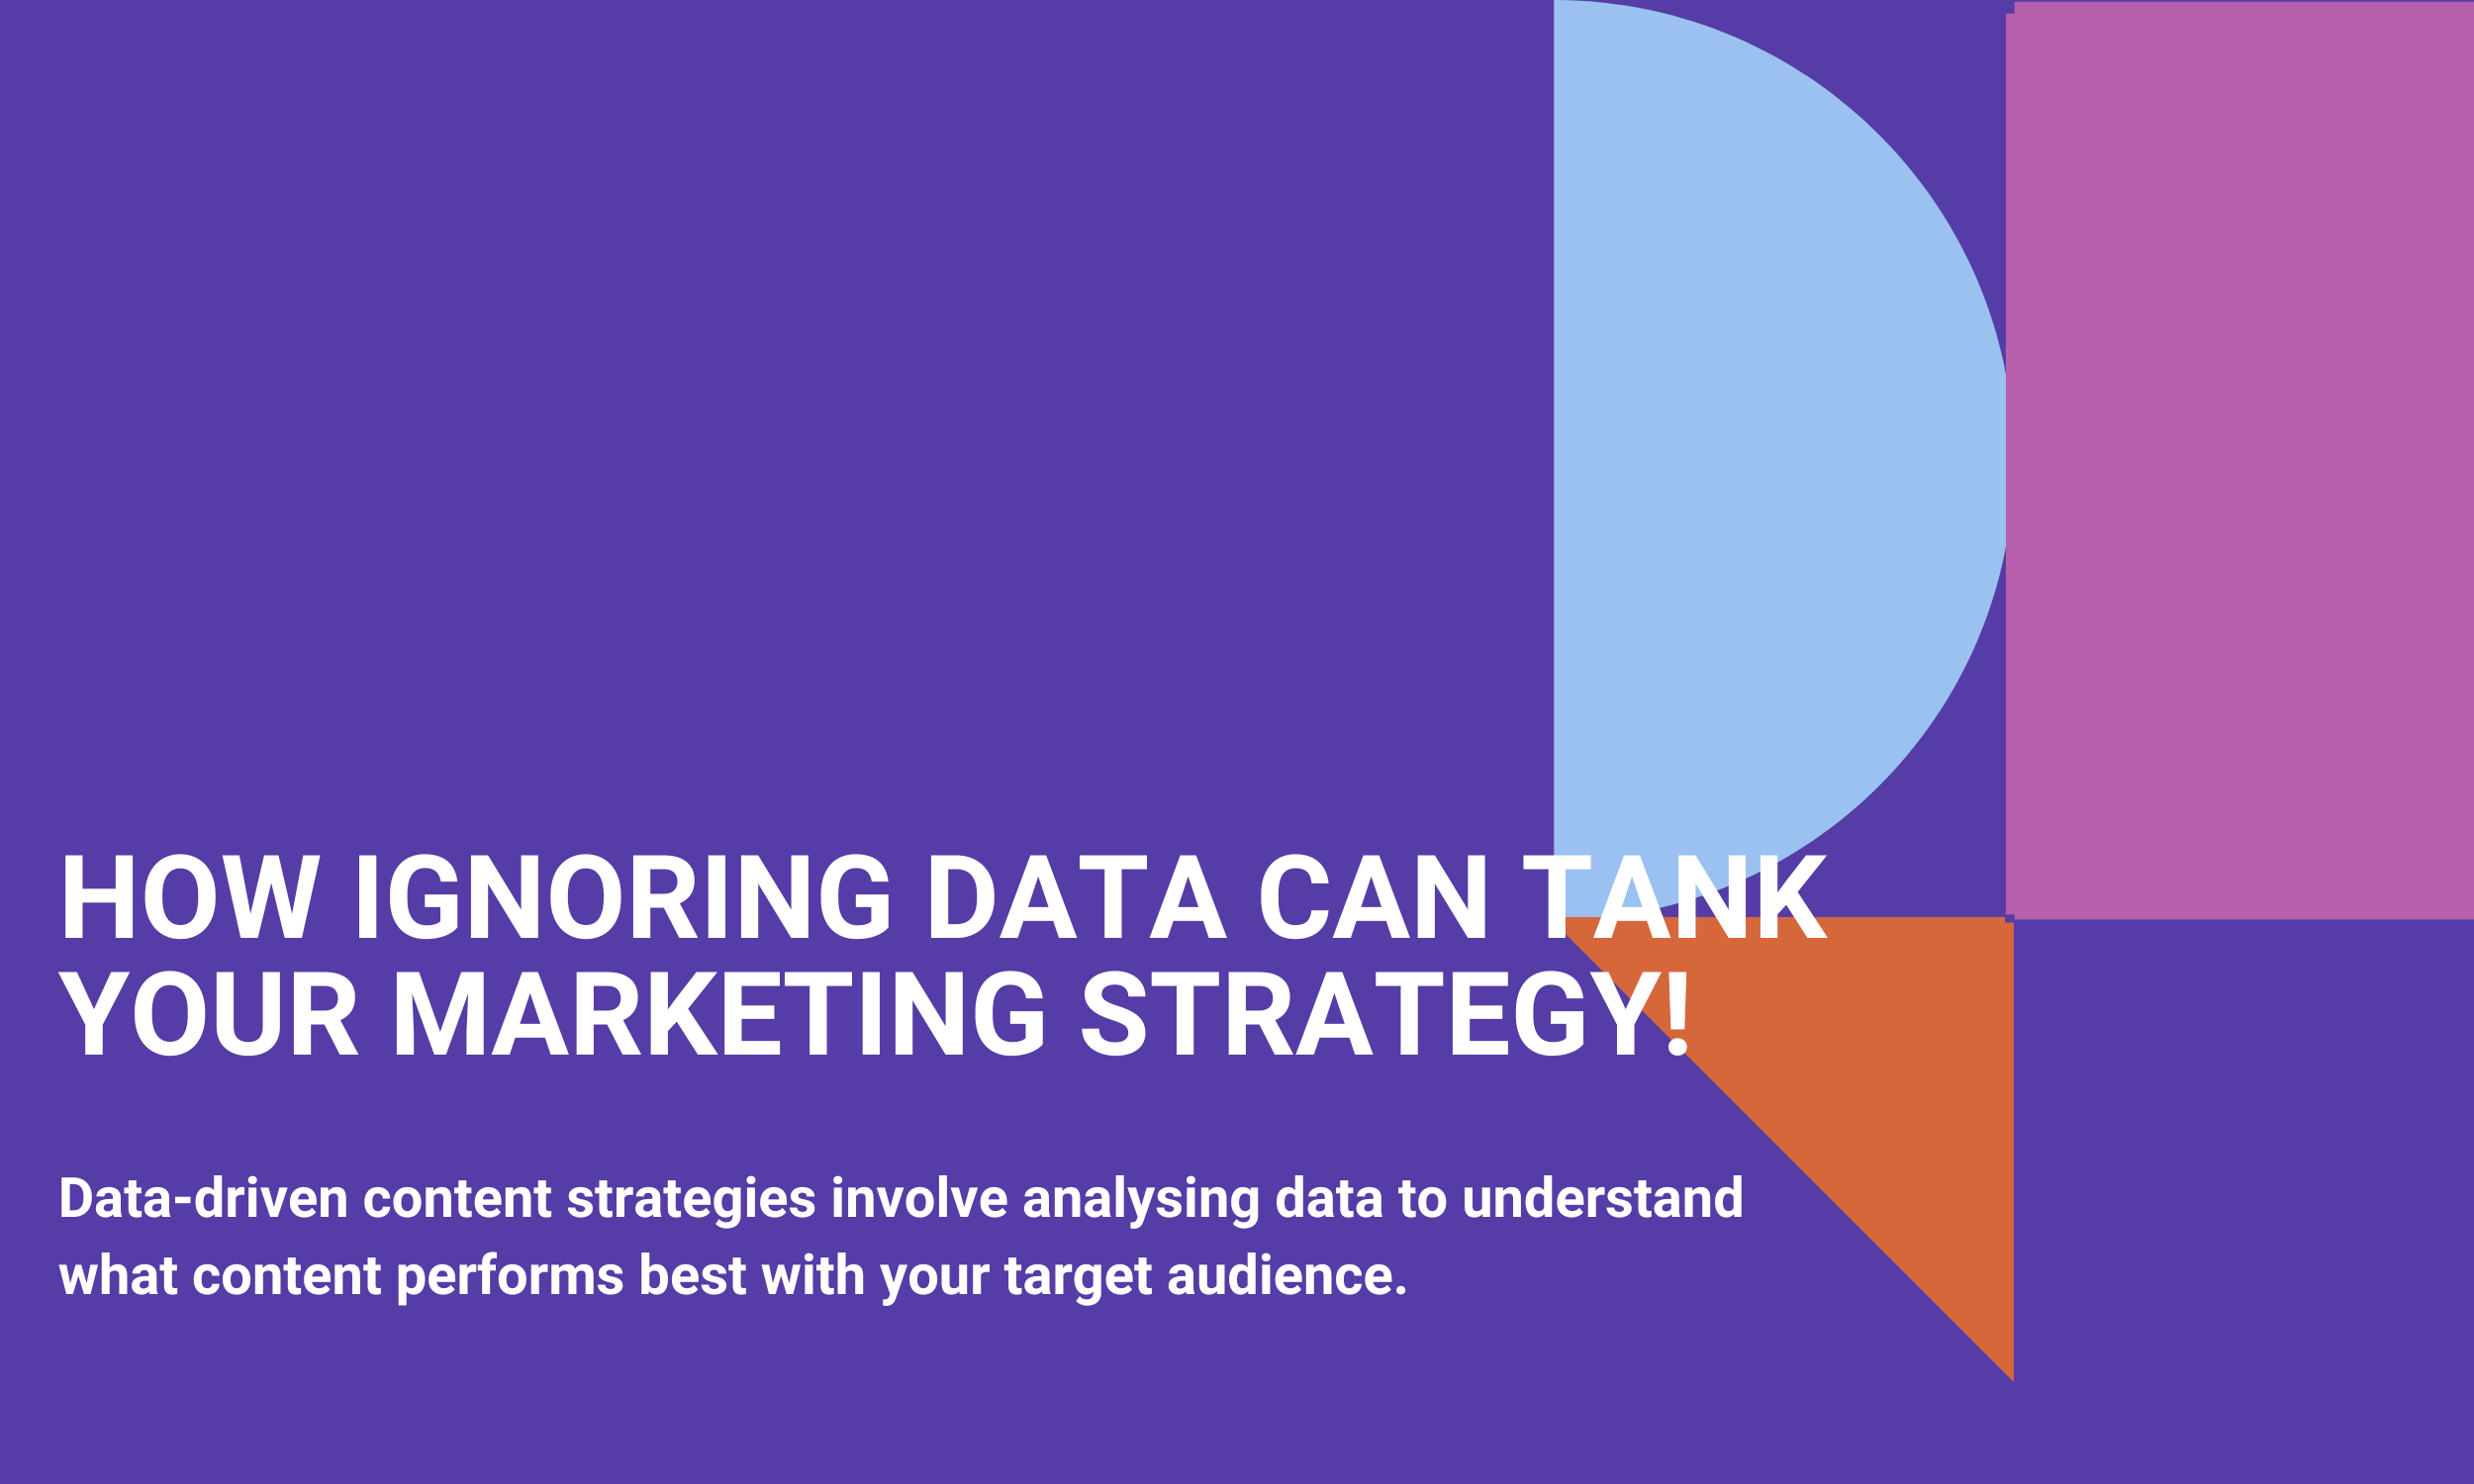 How Ignoring Data Can Tank Your Marketing Strategy!